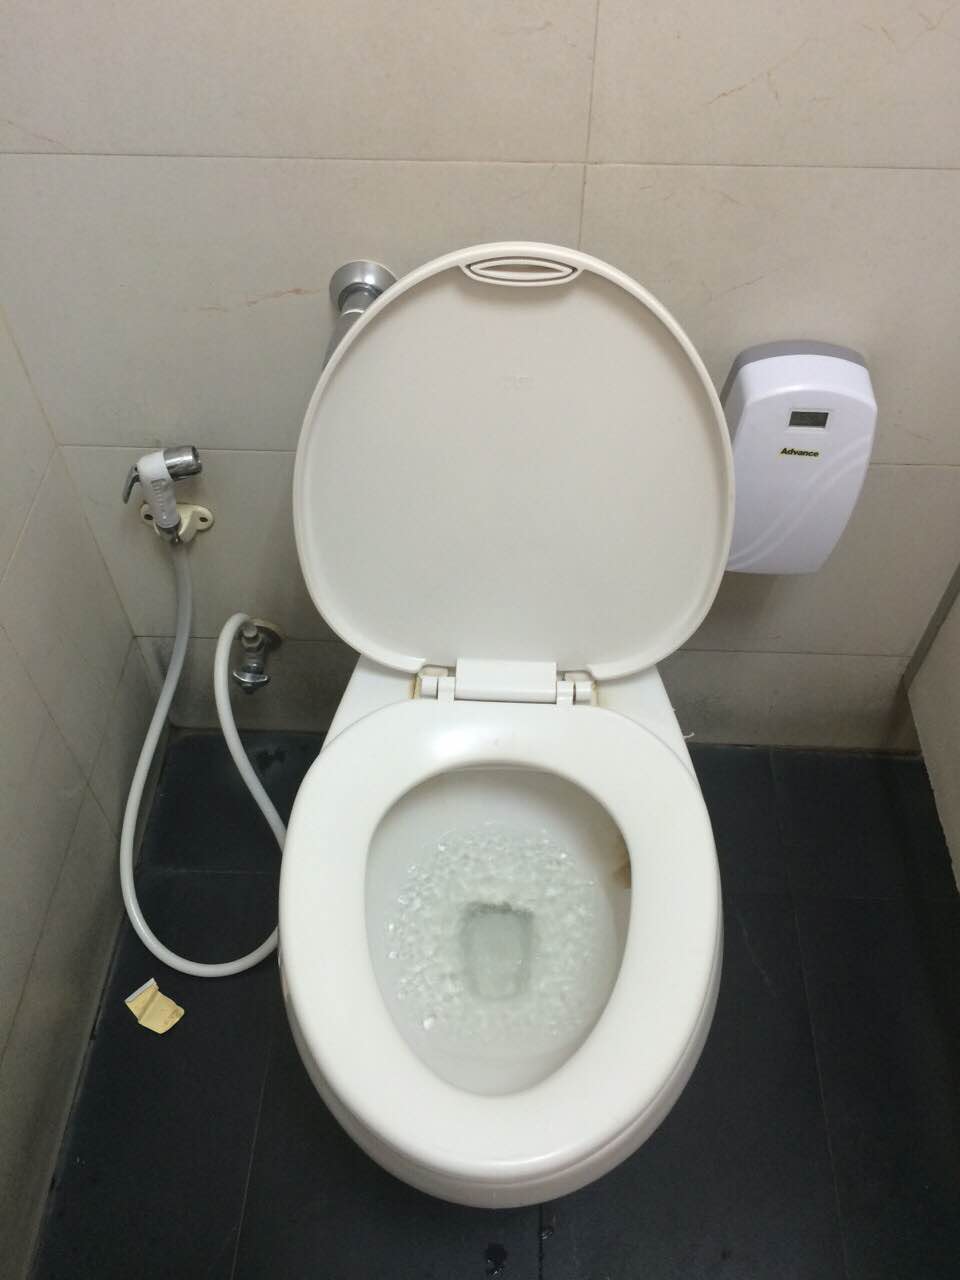 Toilet and a hose. No TP in sight. 